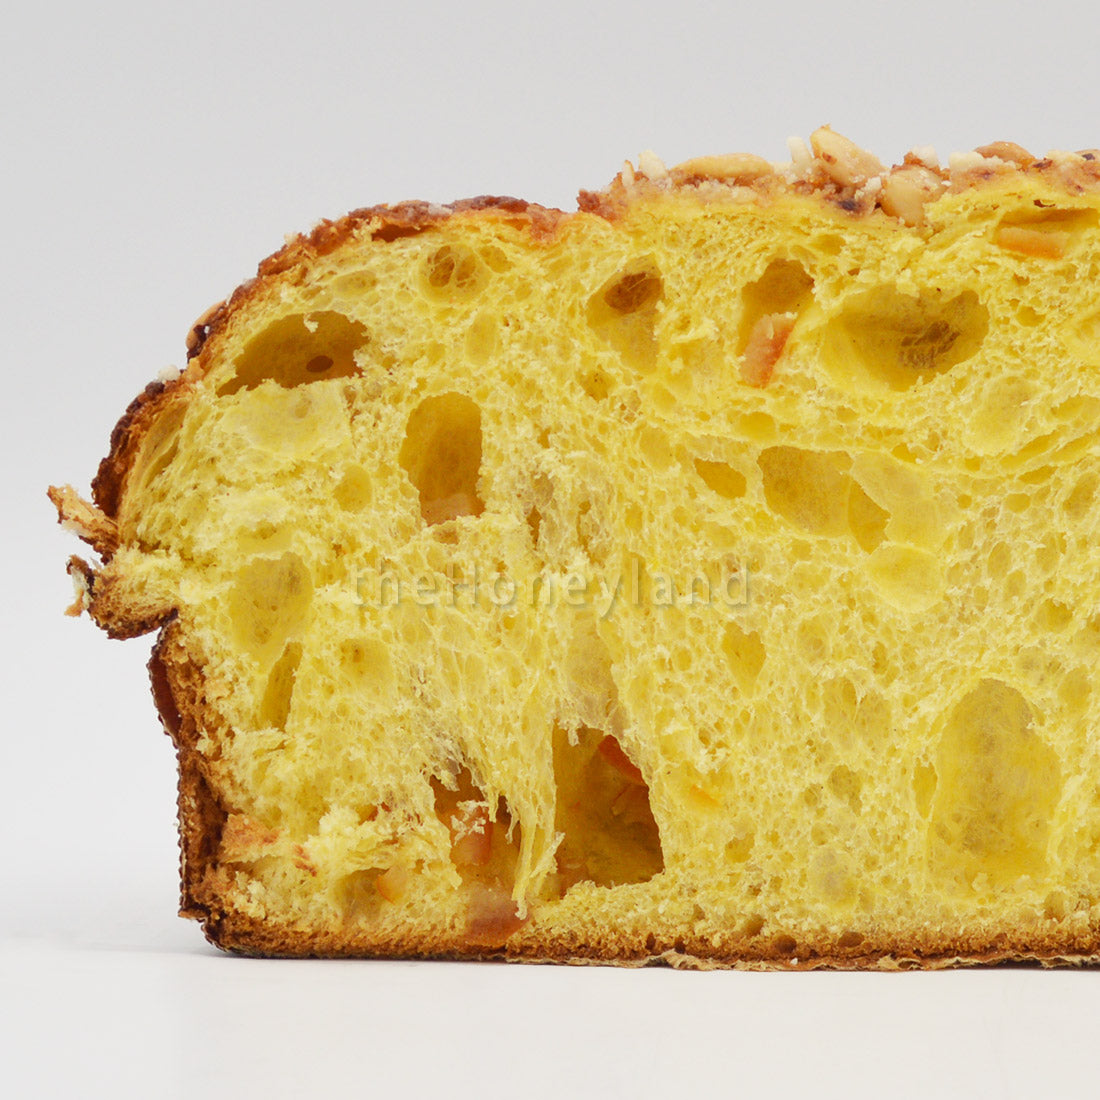 Colomba cake made with Ancient Tuscan Grains